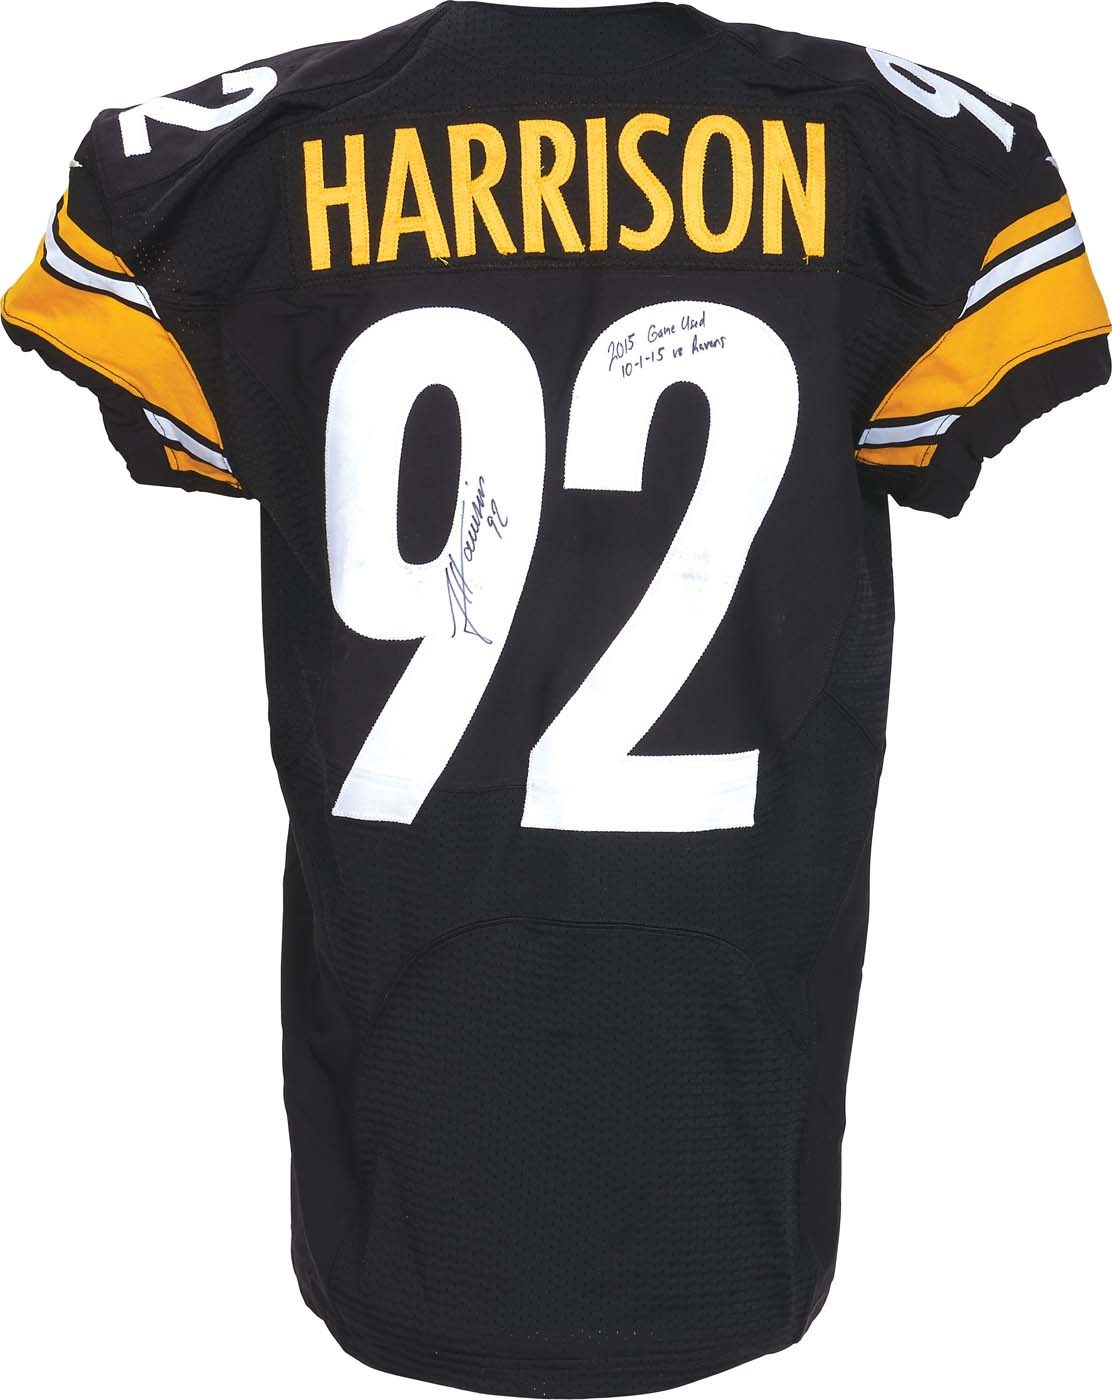 - October 1, 2015 James Harrison Pittsburgh Steelers Game Worn Jersey, Cleats and Gloves